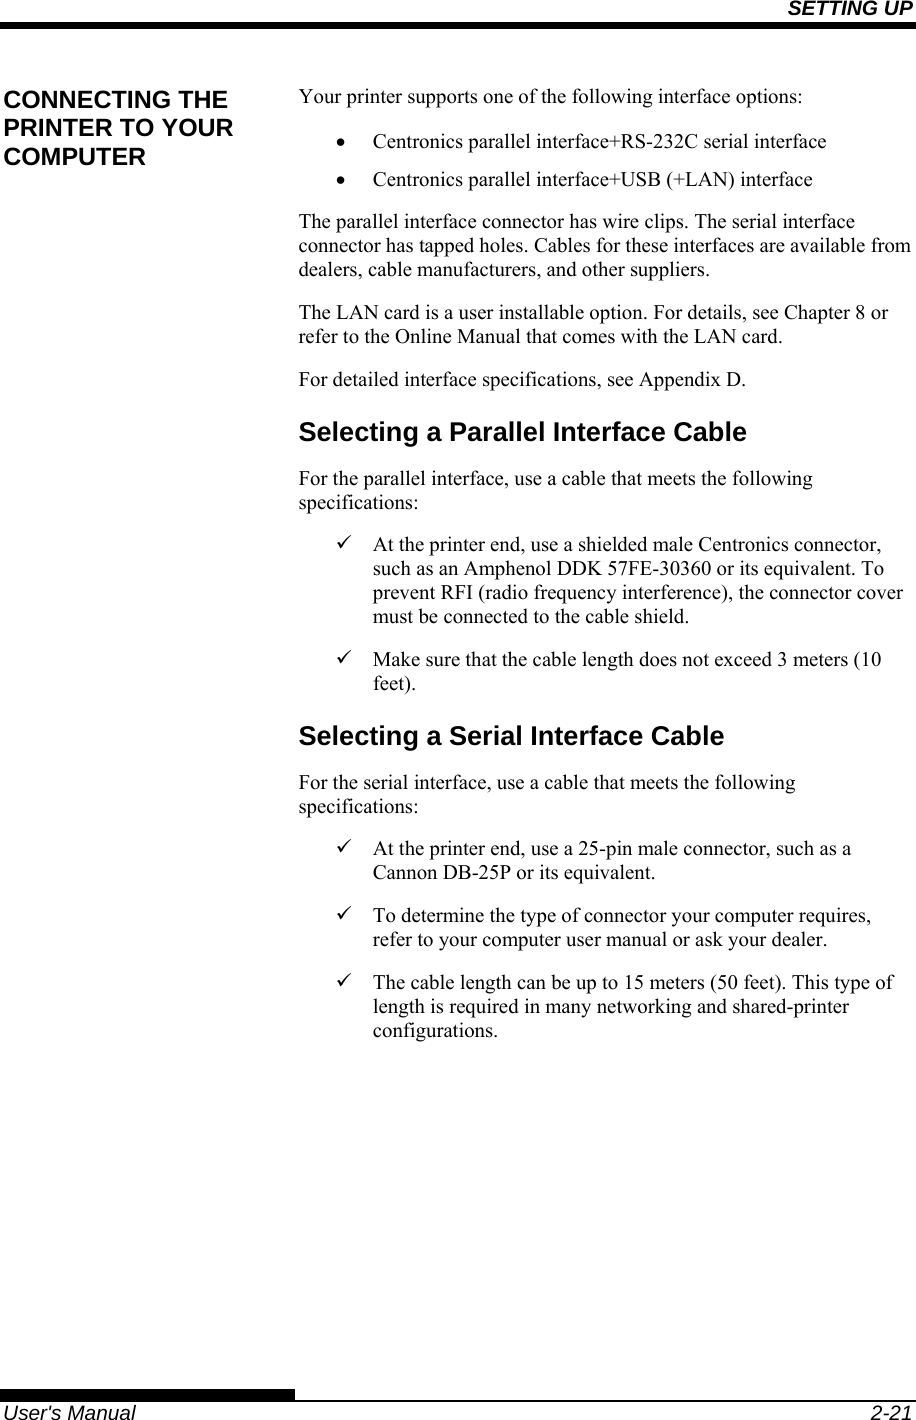 SETTING UP   User&apos;s Manual  2-21 Your printer supports one of the following interface options: •  Centronics parallel interface+RS-232C serial interface •  Centronics parallel interface+USB (+LAN) interface The parallel interface connector has wire clips. The serial interface connector has tapped holes. Cables for these interfaces are available from dealers, cable manufacturers, and other suppliers. The LAN card is a user installable option. For details, see Chapter 8 or refer to the Online Manual that comes with the LAN card. For detailed interface specifications, see Appendix D. Selecting a Parallel Interface Cable For the parallel interface, use a cable that meets the following specifications: 9  At the printer end, use a shielded male Centronics connector, such as an Amphenol DDK 57FE-30360 or its equivalent. To prevent RFI (radio frequency interference), the connector cover must be connected to the cable shield. 9  Make sure that the cable length does not exceed 3 meters (10 feet). Selecting a Serial Interface Cable For the serial interface, use a cable that meets the following specifications: 9  At the printer end, use a 25-pin male connector, such as a Cannon DB-25P or its equivalent. 9  To determine the type of connector your computer requires, refer to your computer user manual or ask your dealer. 9  The cable length can be up to 15 meters (50 feet). This type of length is required in many networking and shared-printer configurations. CONNECTING THE PRINTER TO YOUR COMPUTER 